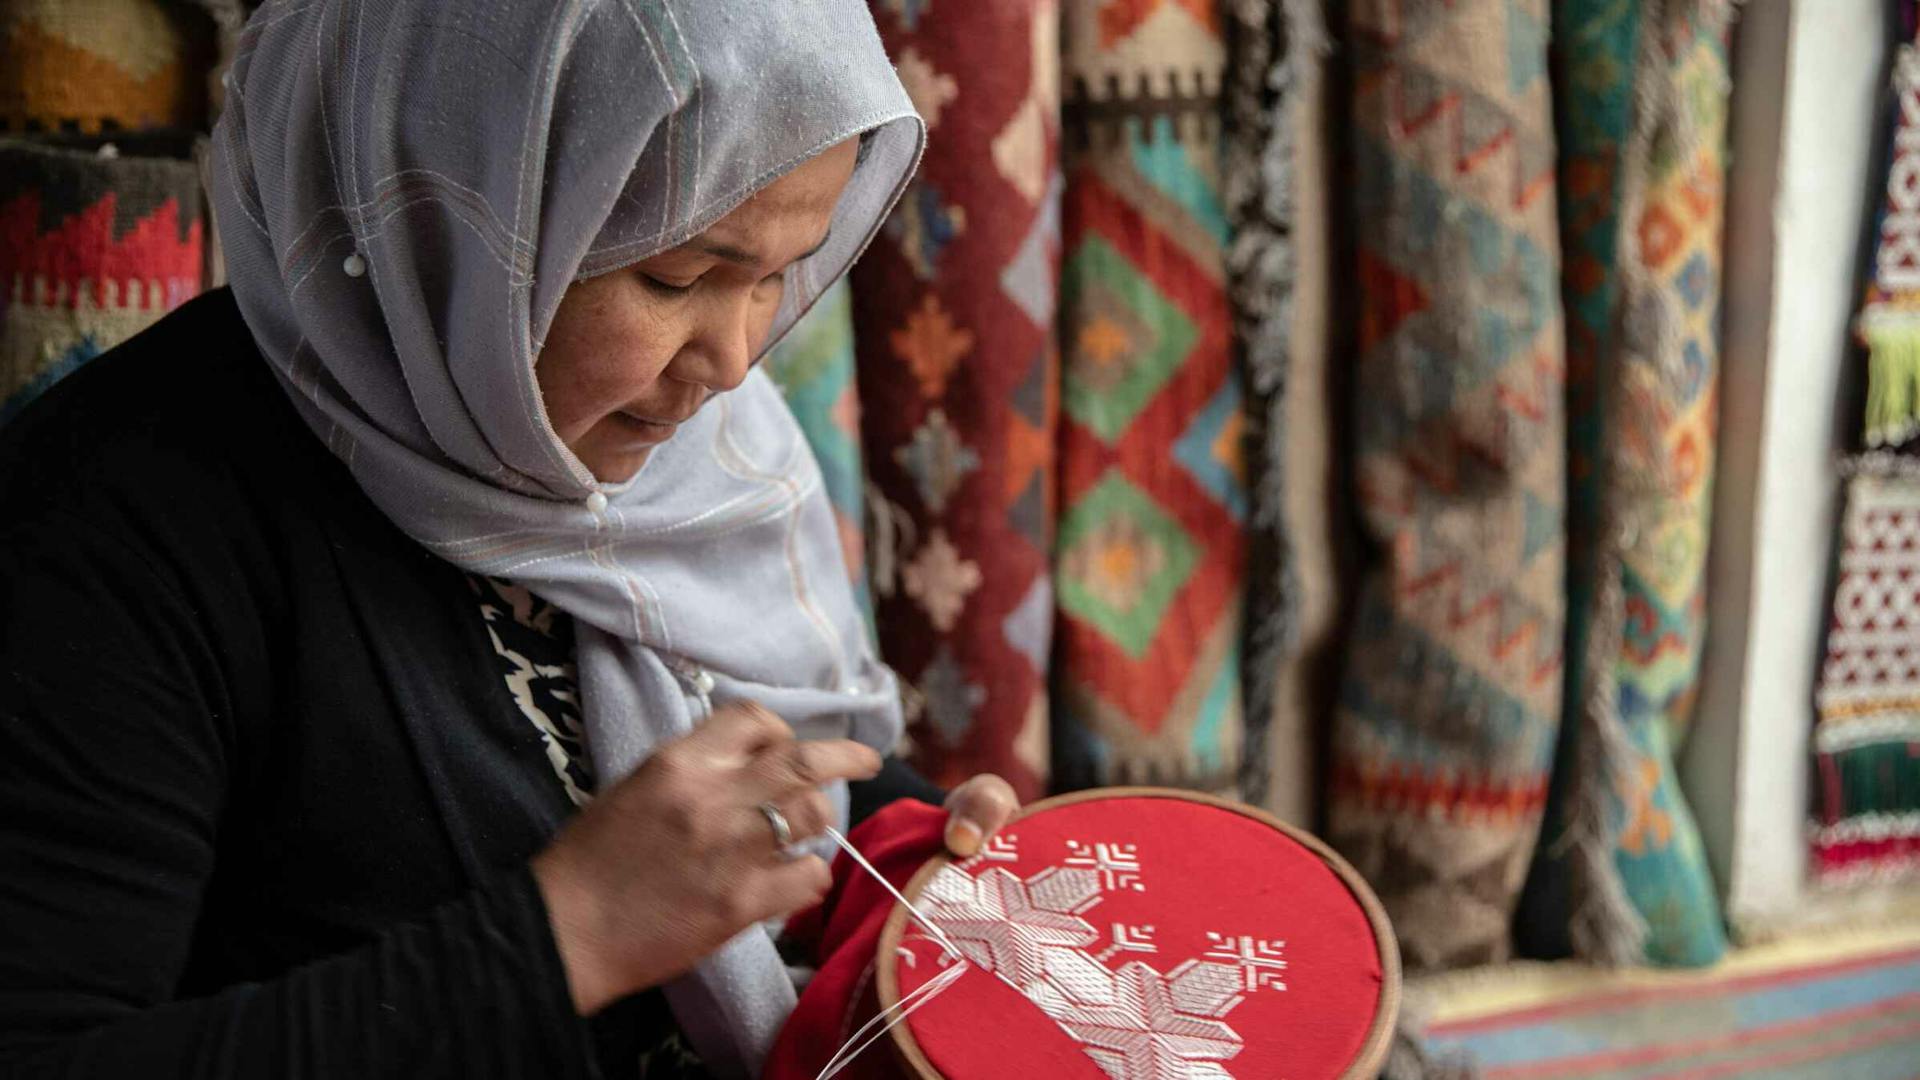 A middle-aged Afghan woman in a headscarf embroiders in her home.